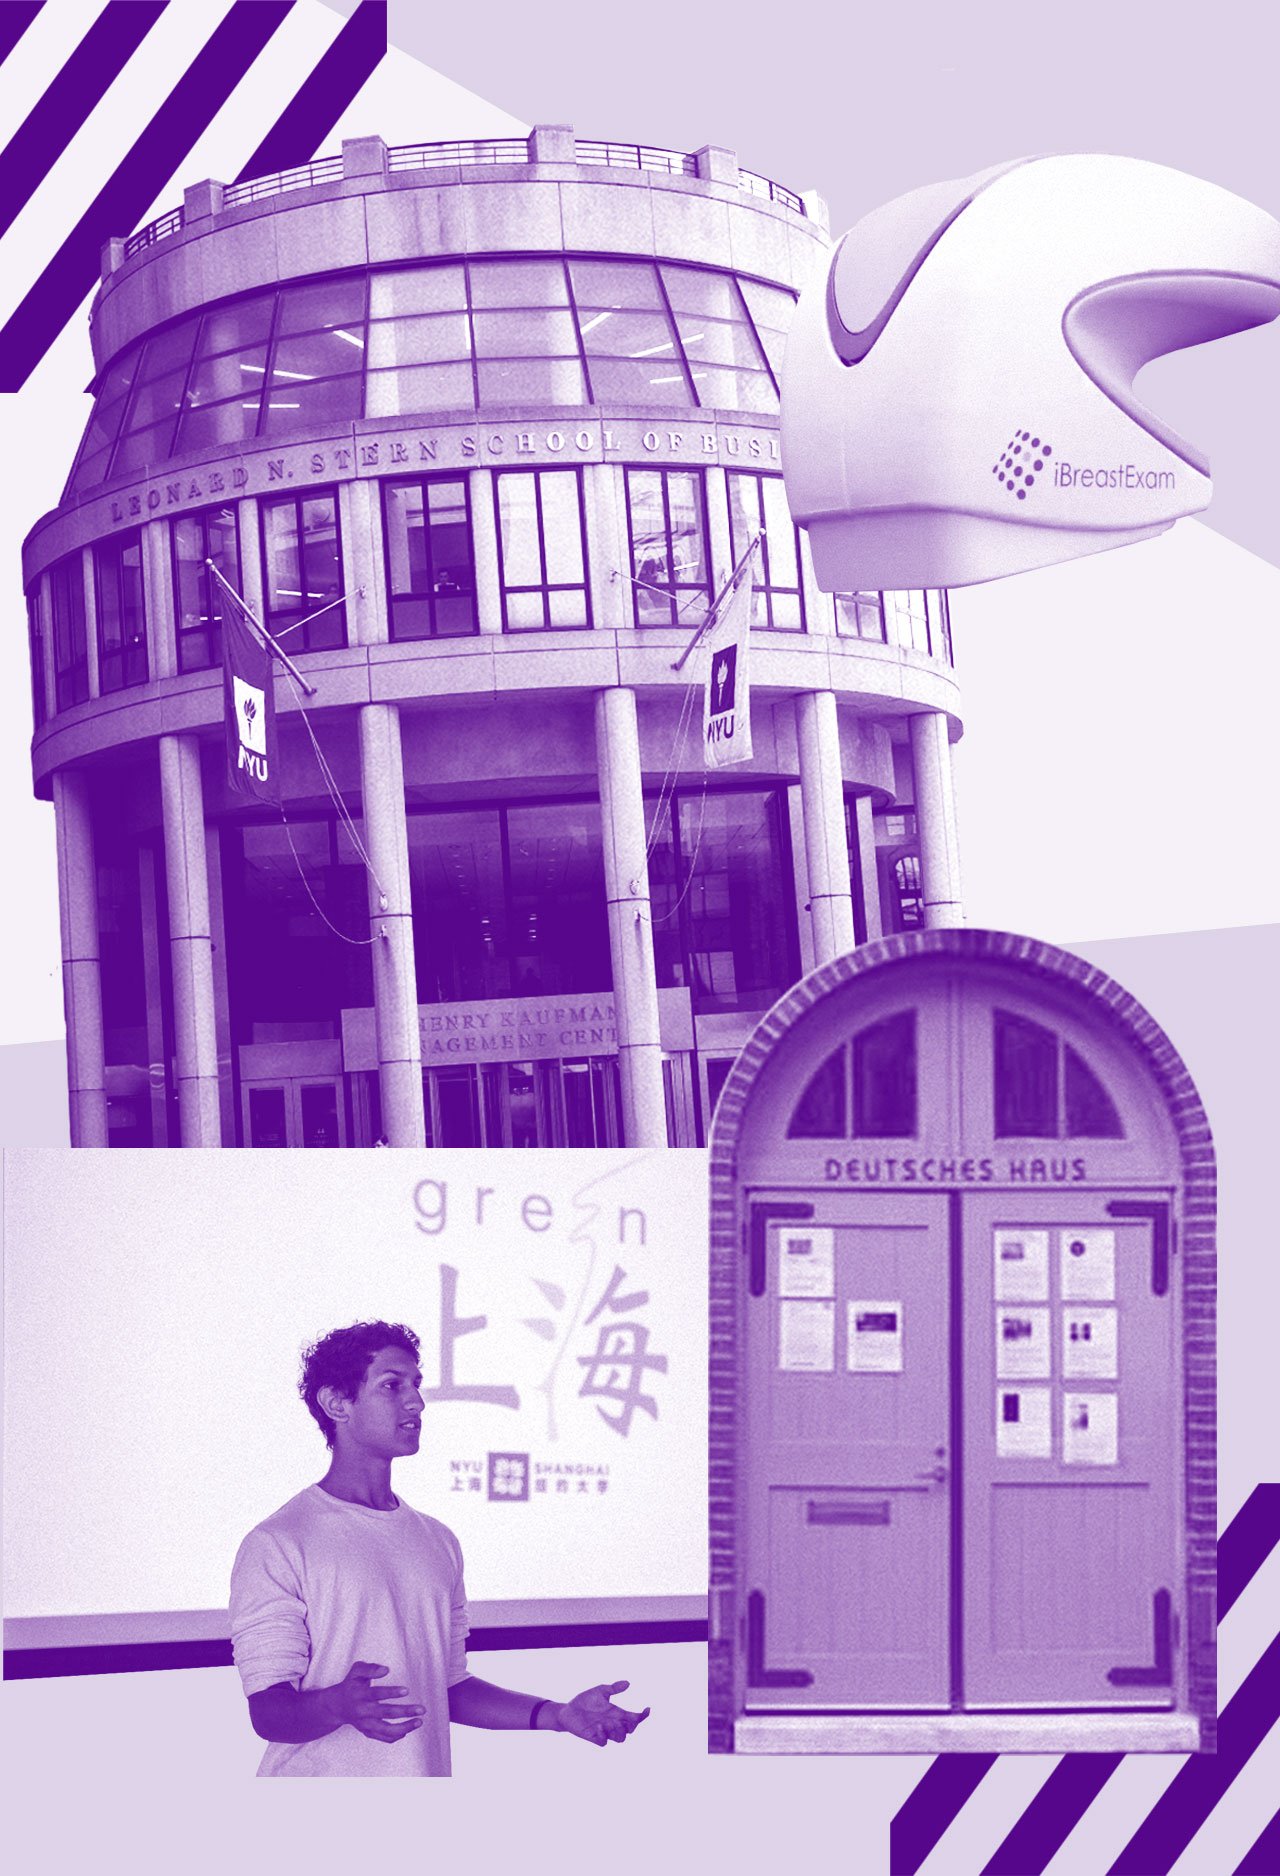 Monthly Roundup collage depicting various events going on around campus. Image one: the entrance of the Stern School of Business. Image two: the IBreastExam device created by engineering professor Matthew Campisi. Image three: the front door of the Deutsches Haus. Image four: a student who is part of Re-Makerspace giving a presentation.